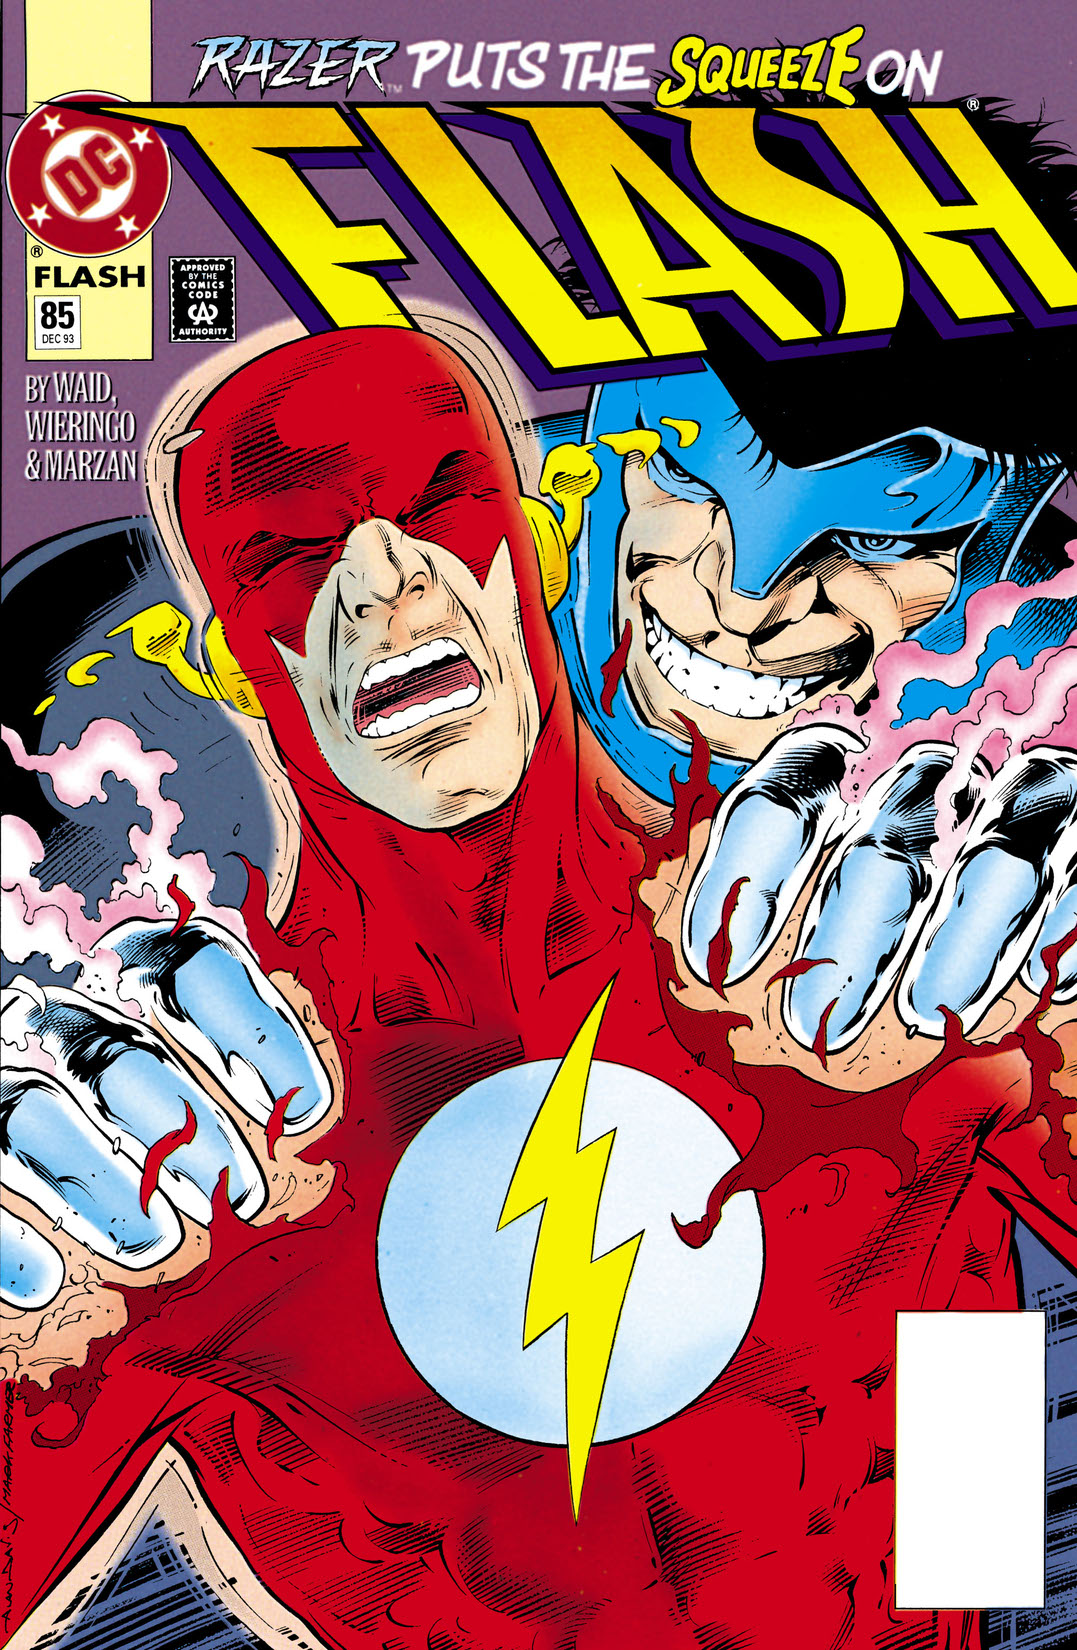 The Flash (1987-2008) #85 preview images